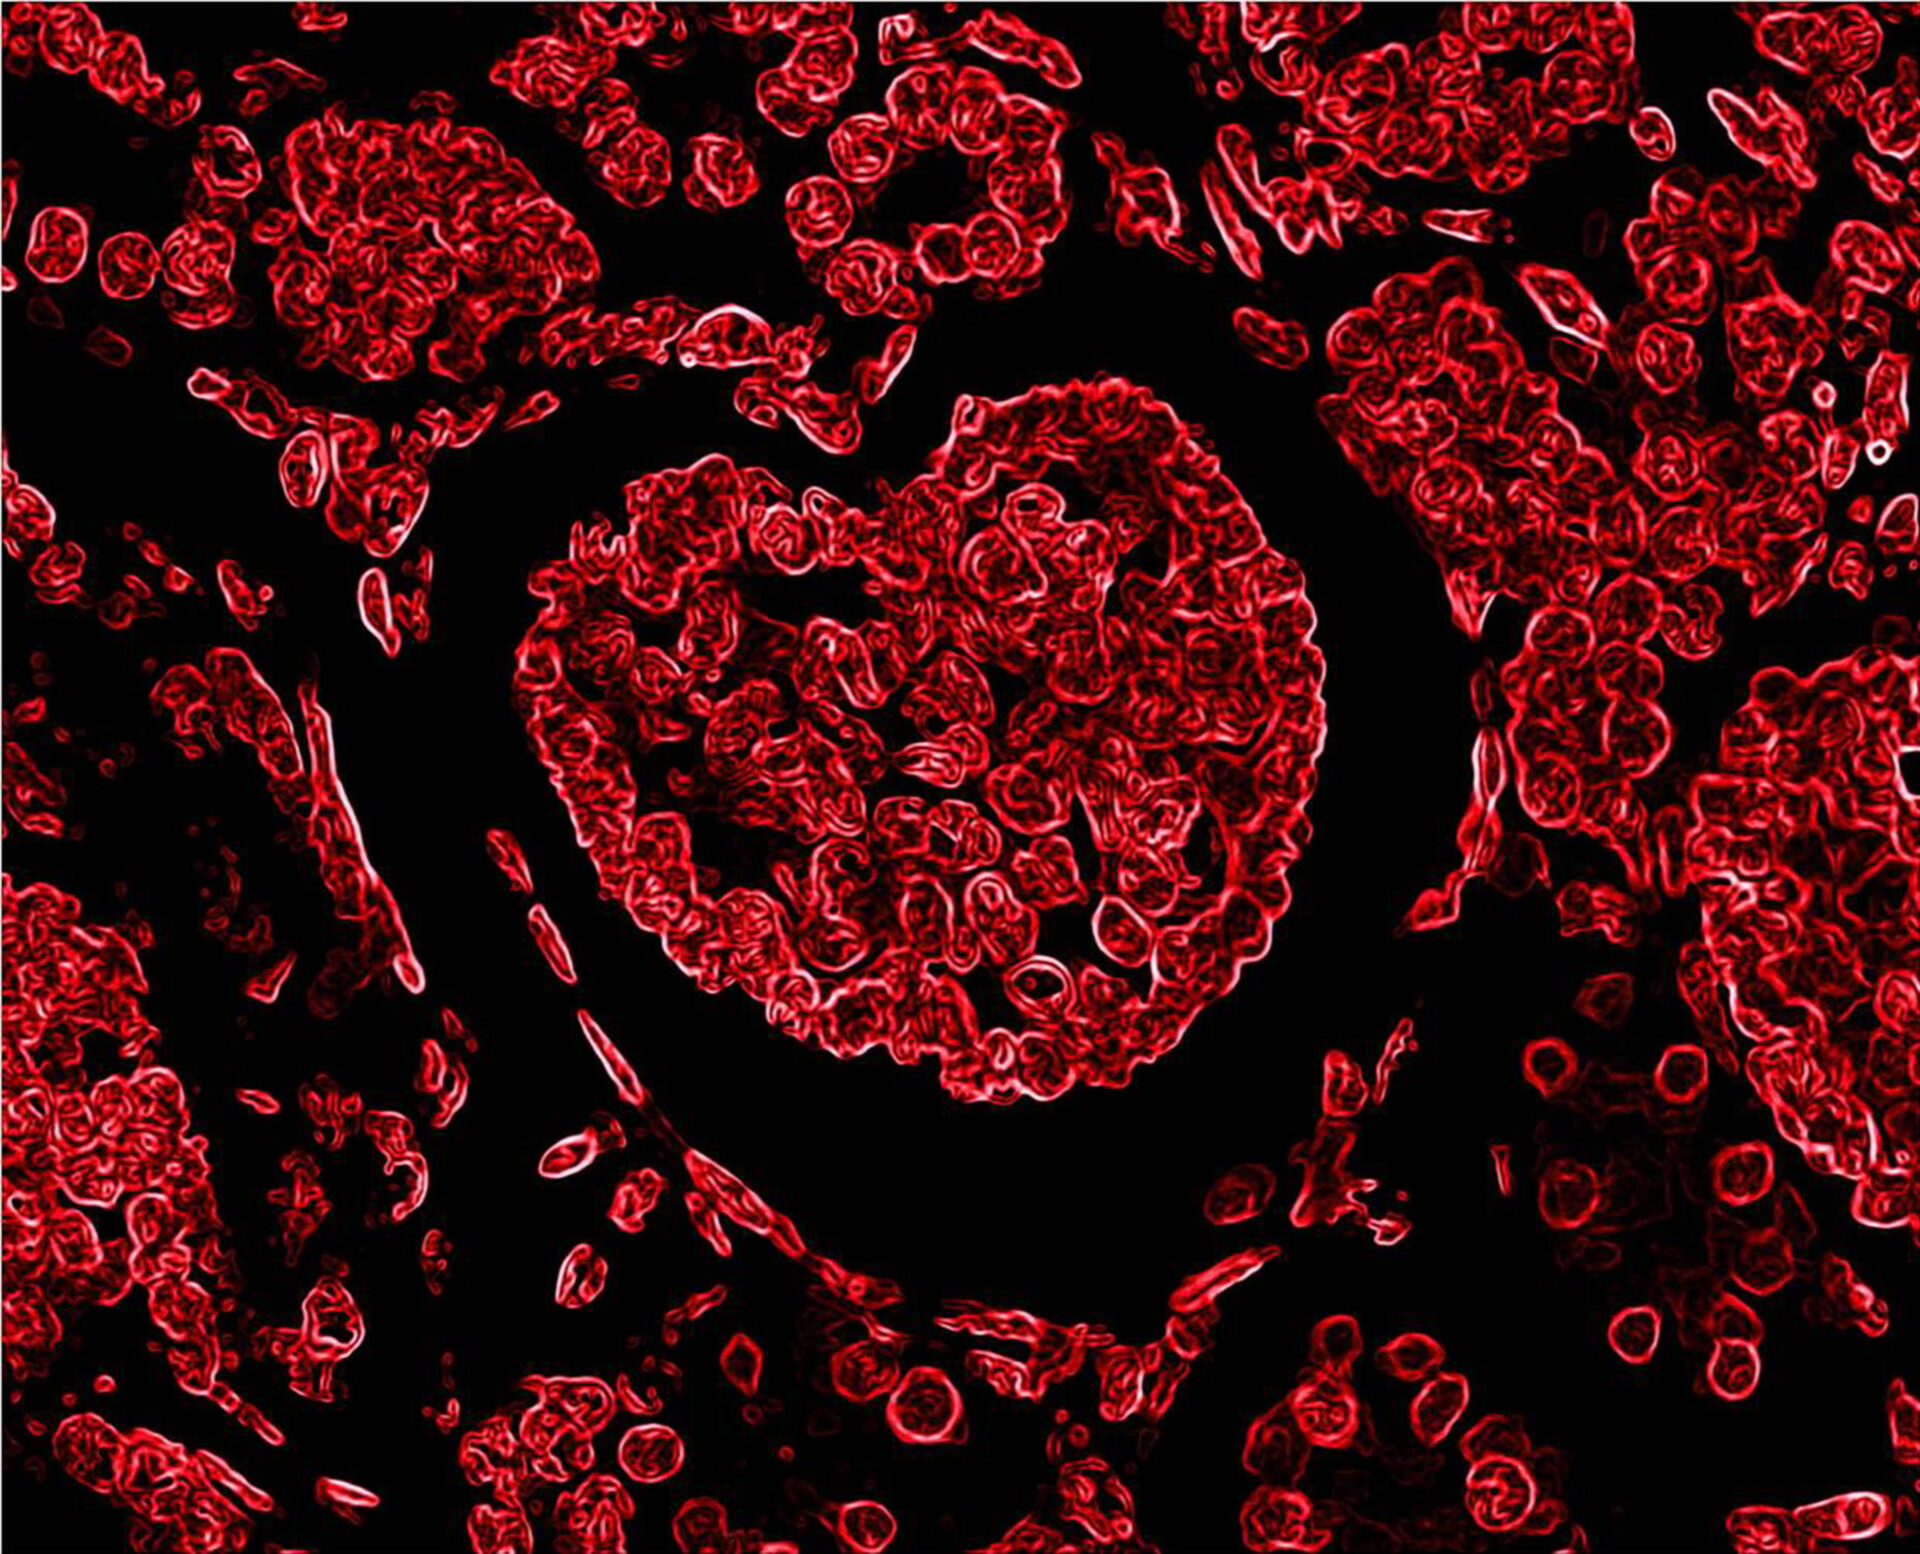 Kidney histological section in which a glomerulus forming the most iconic symbol of love